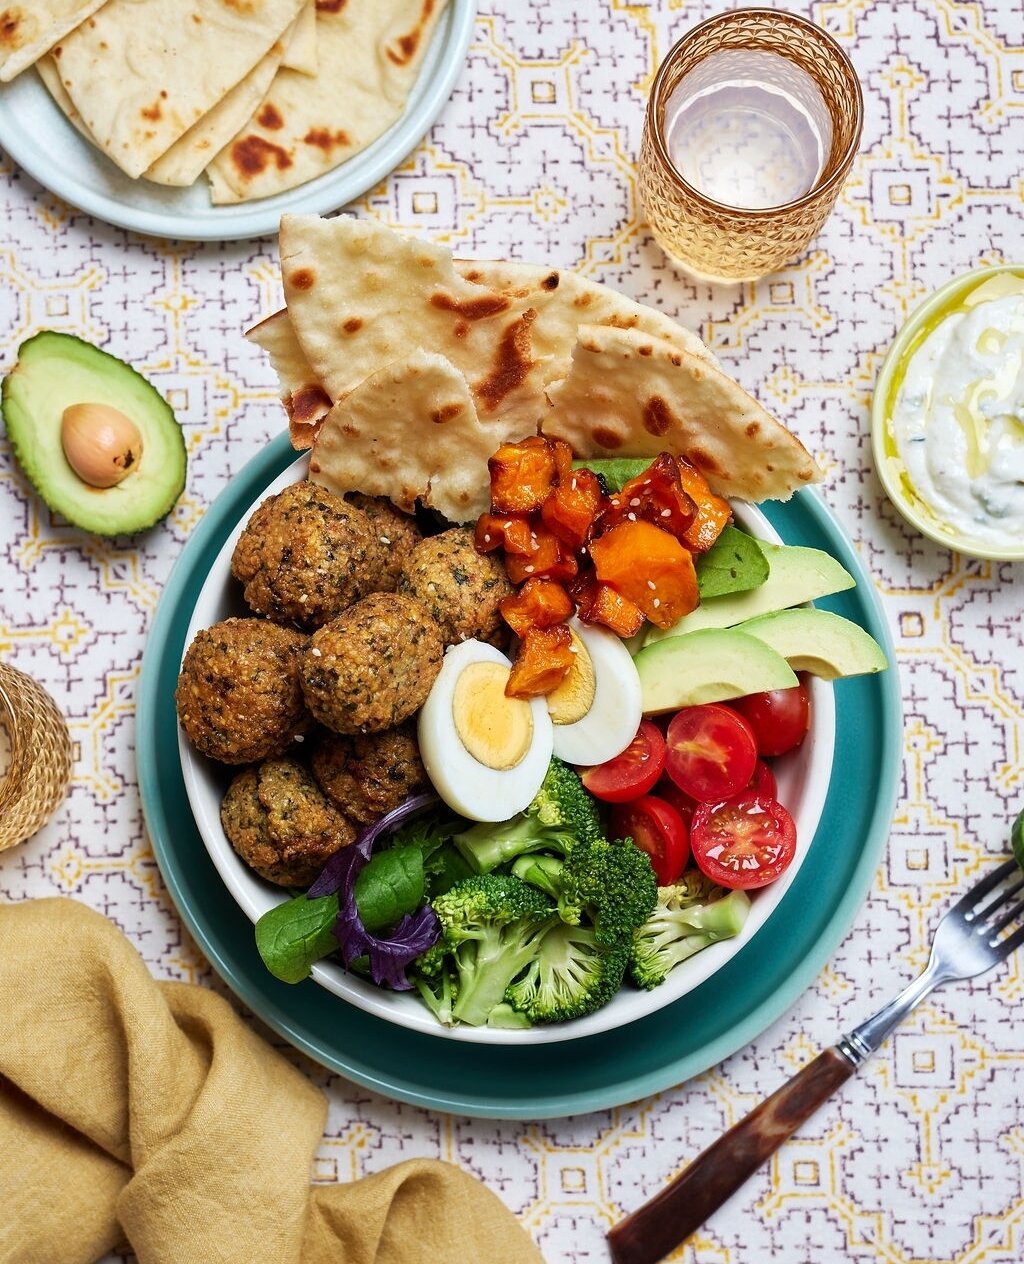 @arabianbites Falafel mixes are now available via @thebrothsisters ONLINE FARMERS MARKET 🎉⁠
⁠
Shop all of your favourite Farmers Market products on one place via @thebrothsisters ⁠
⁠
The NEW ONLINE FARMERS MARKET features delicious and health consci